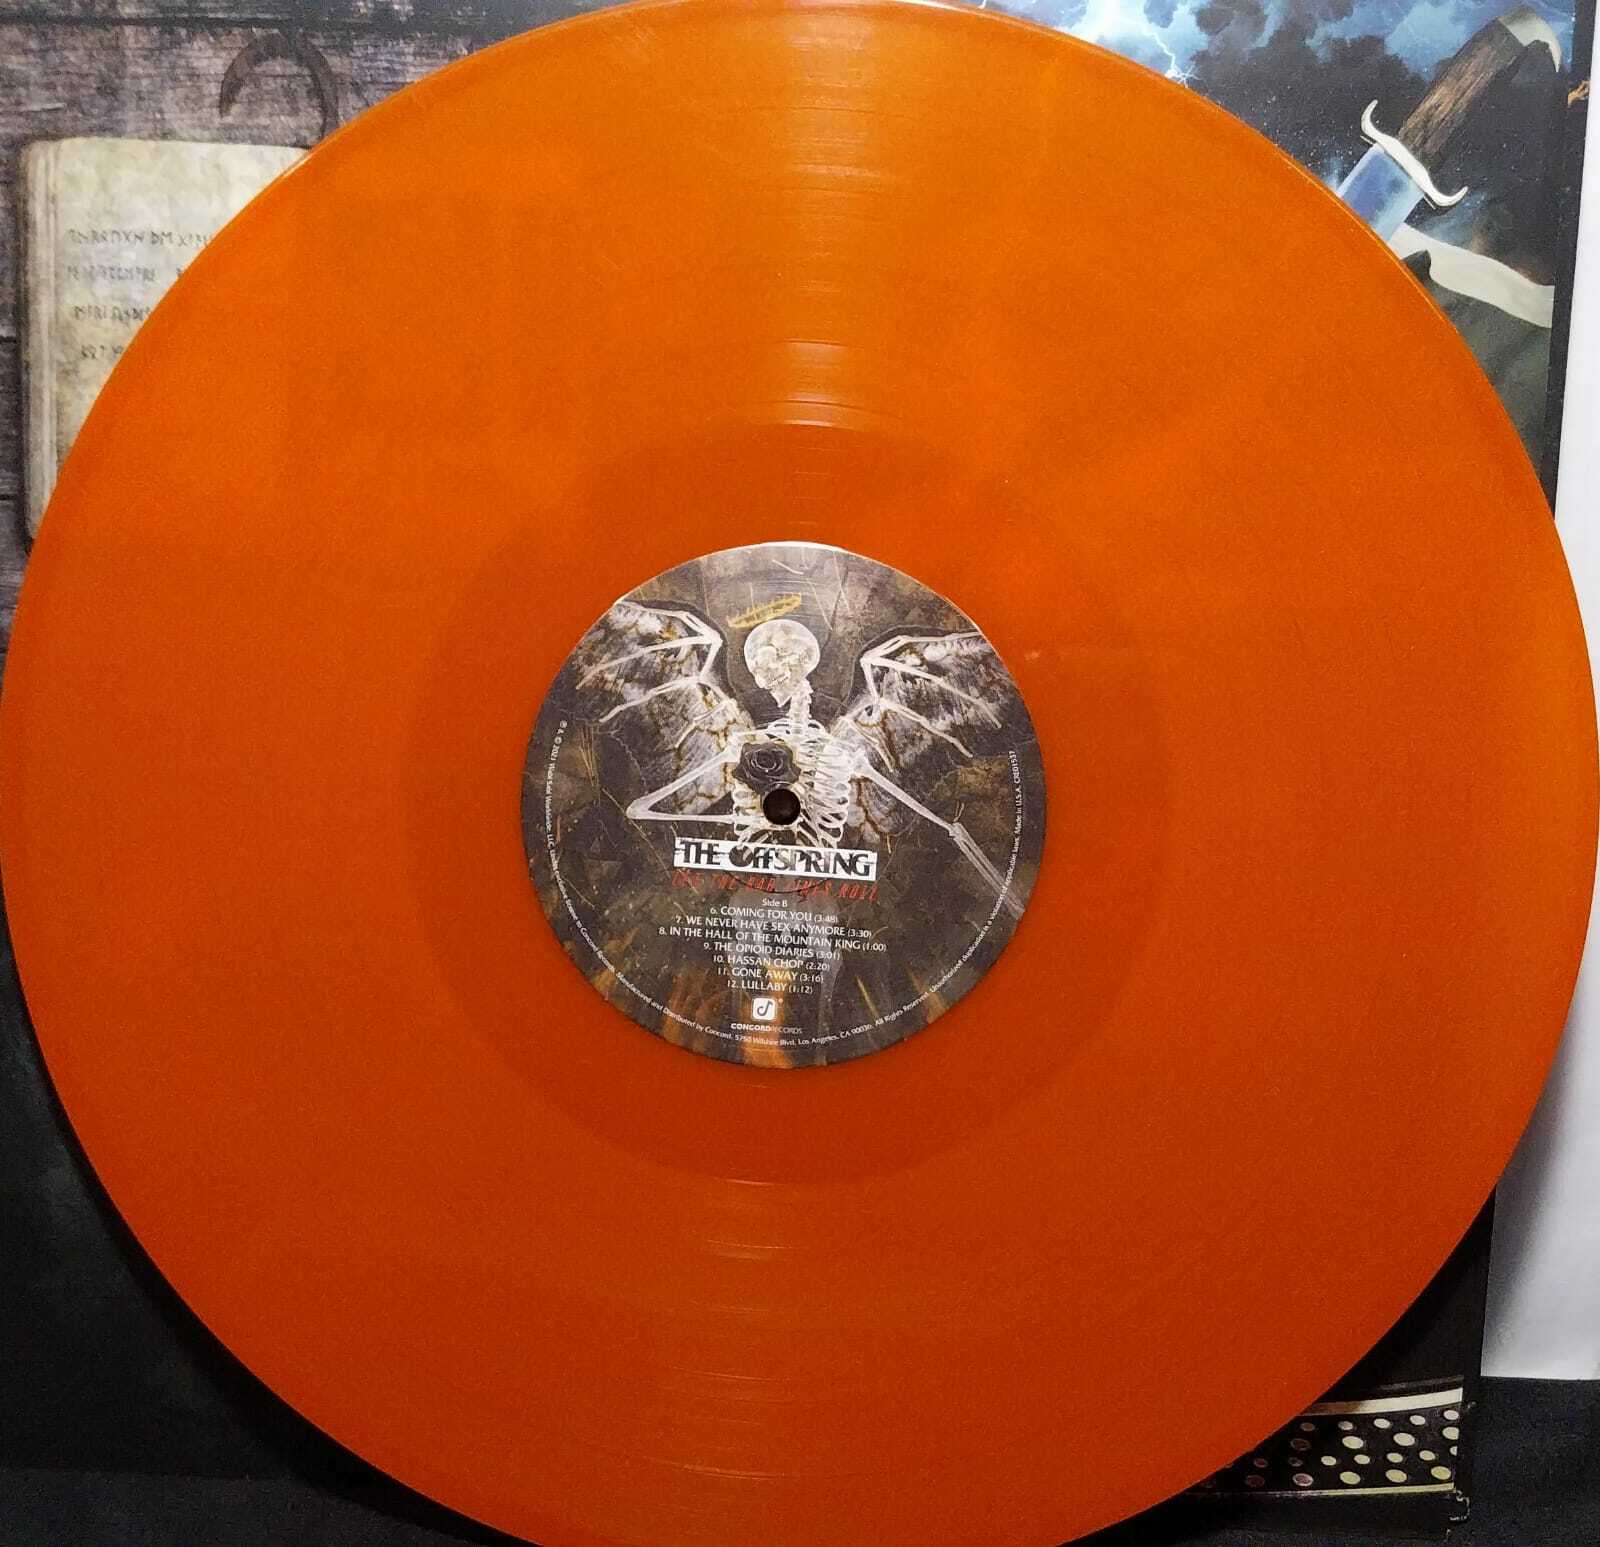 Vinil - Offspring the - Let the Bad Times Roll (USA/Orange)